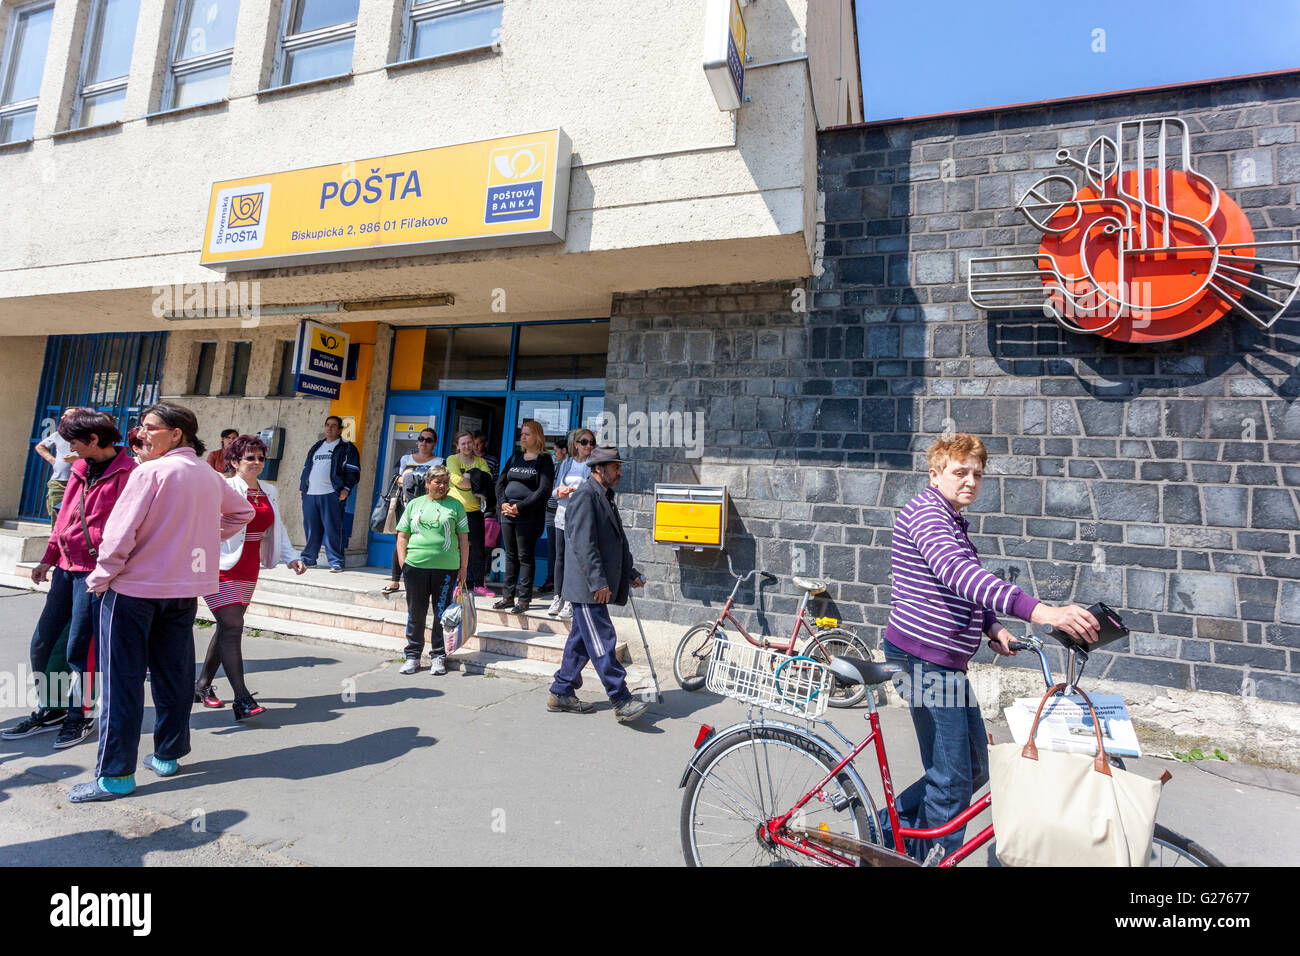 People in front of the local Post office, Filakovo, Slovakia Stock Photo